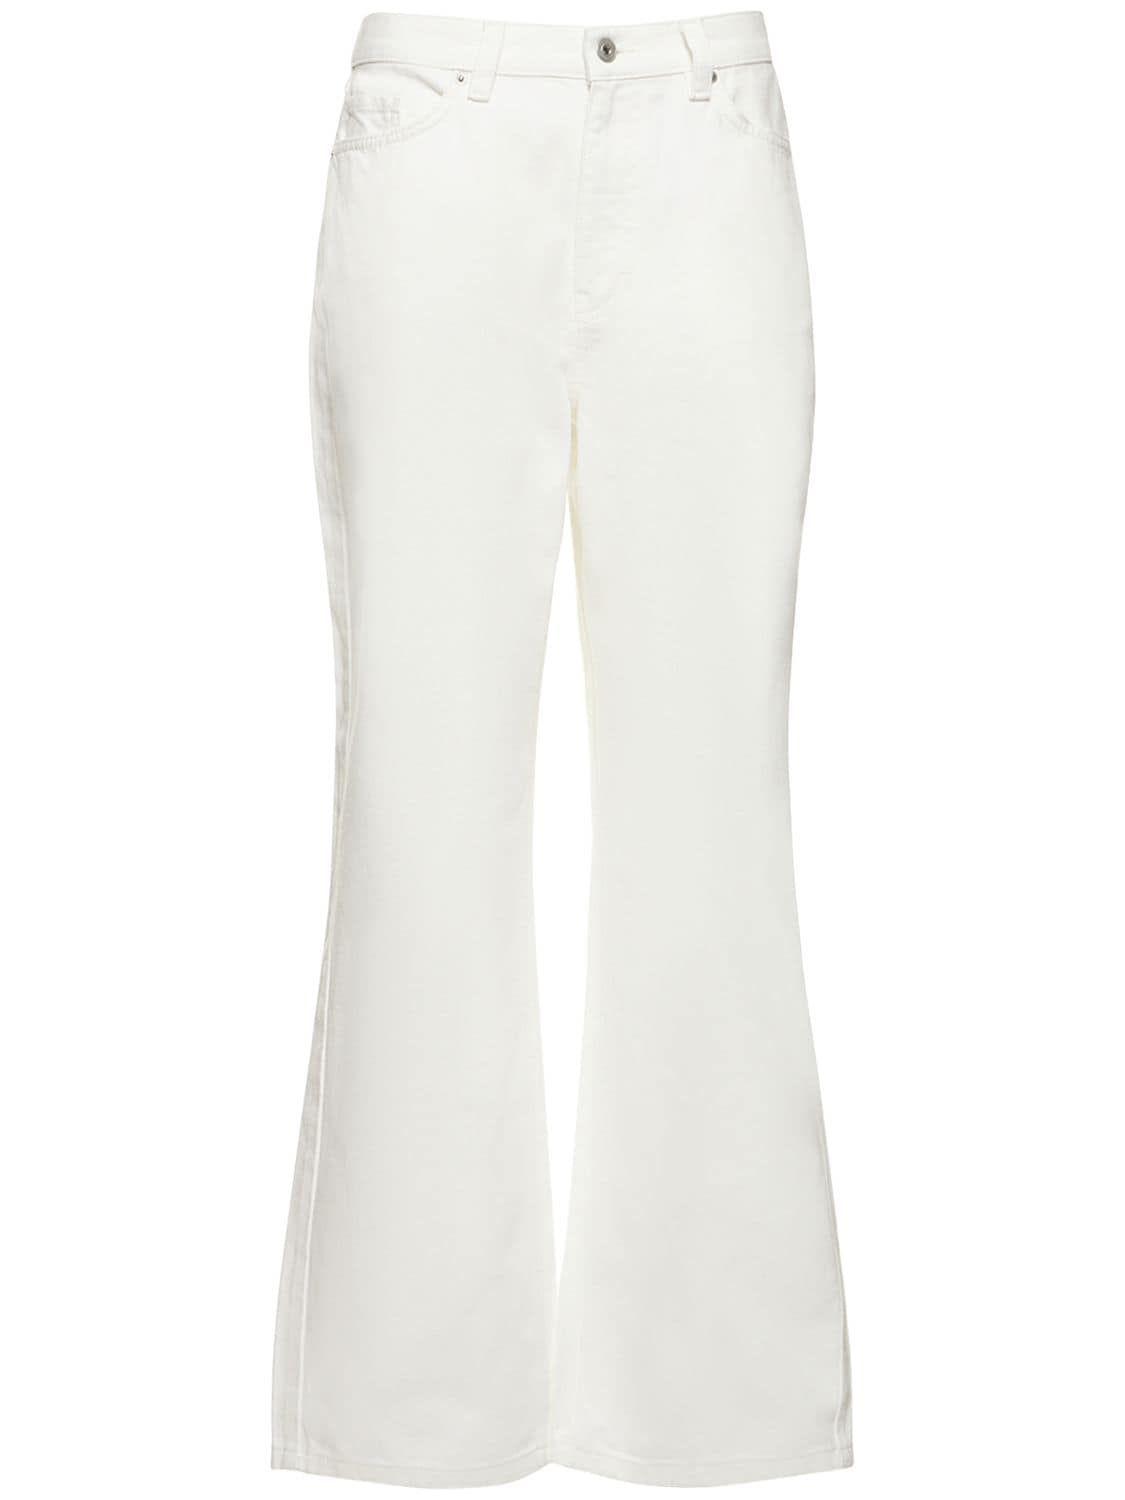 Axel Arigato Sly Low Rise Jeans in White | Lyst